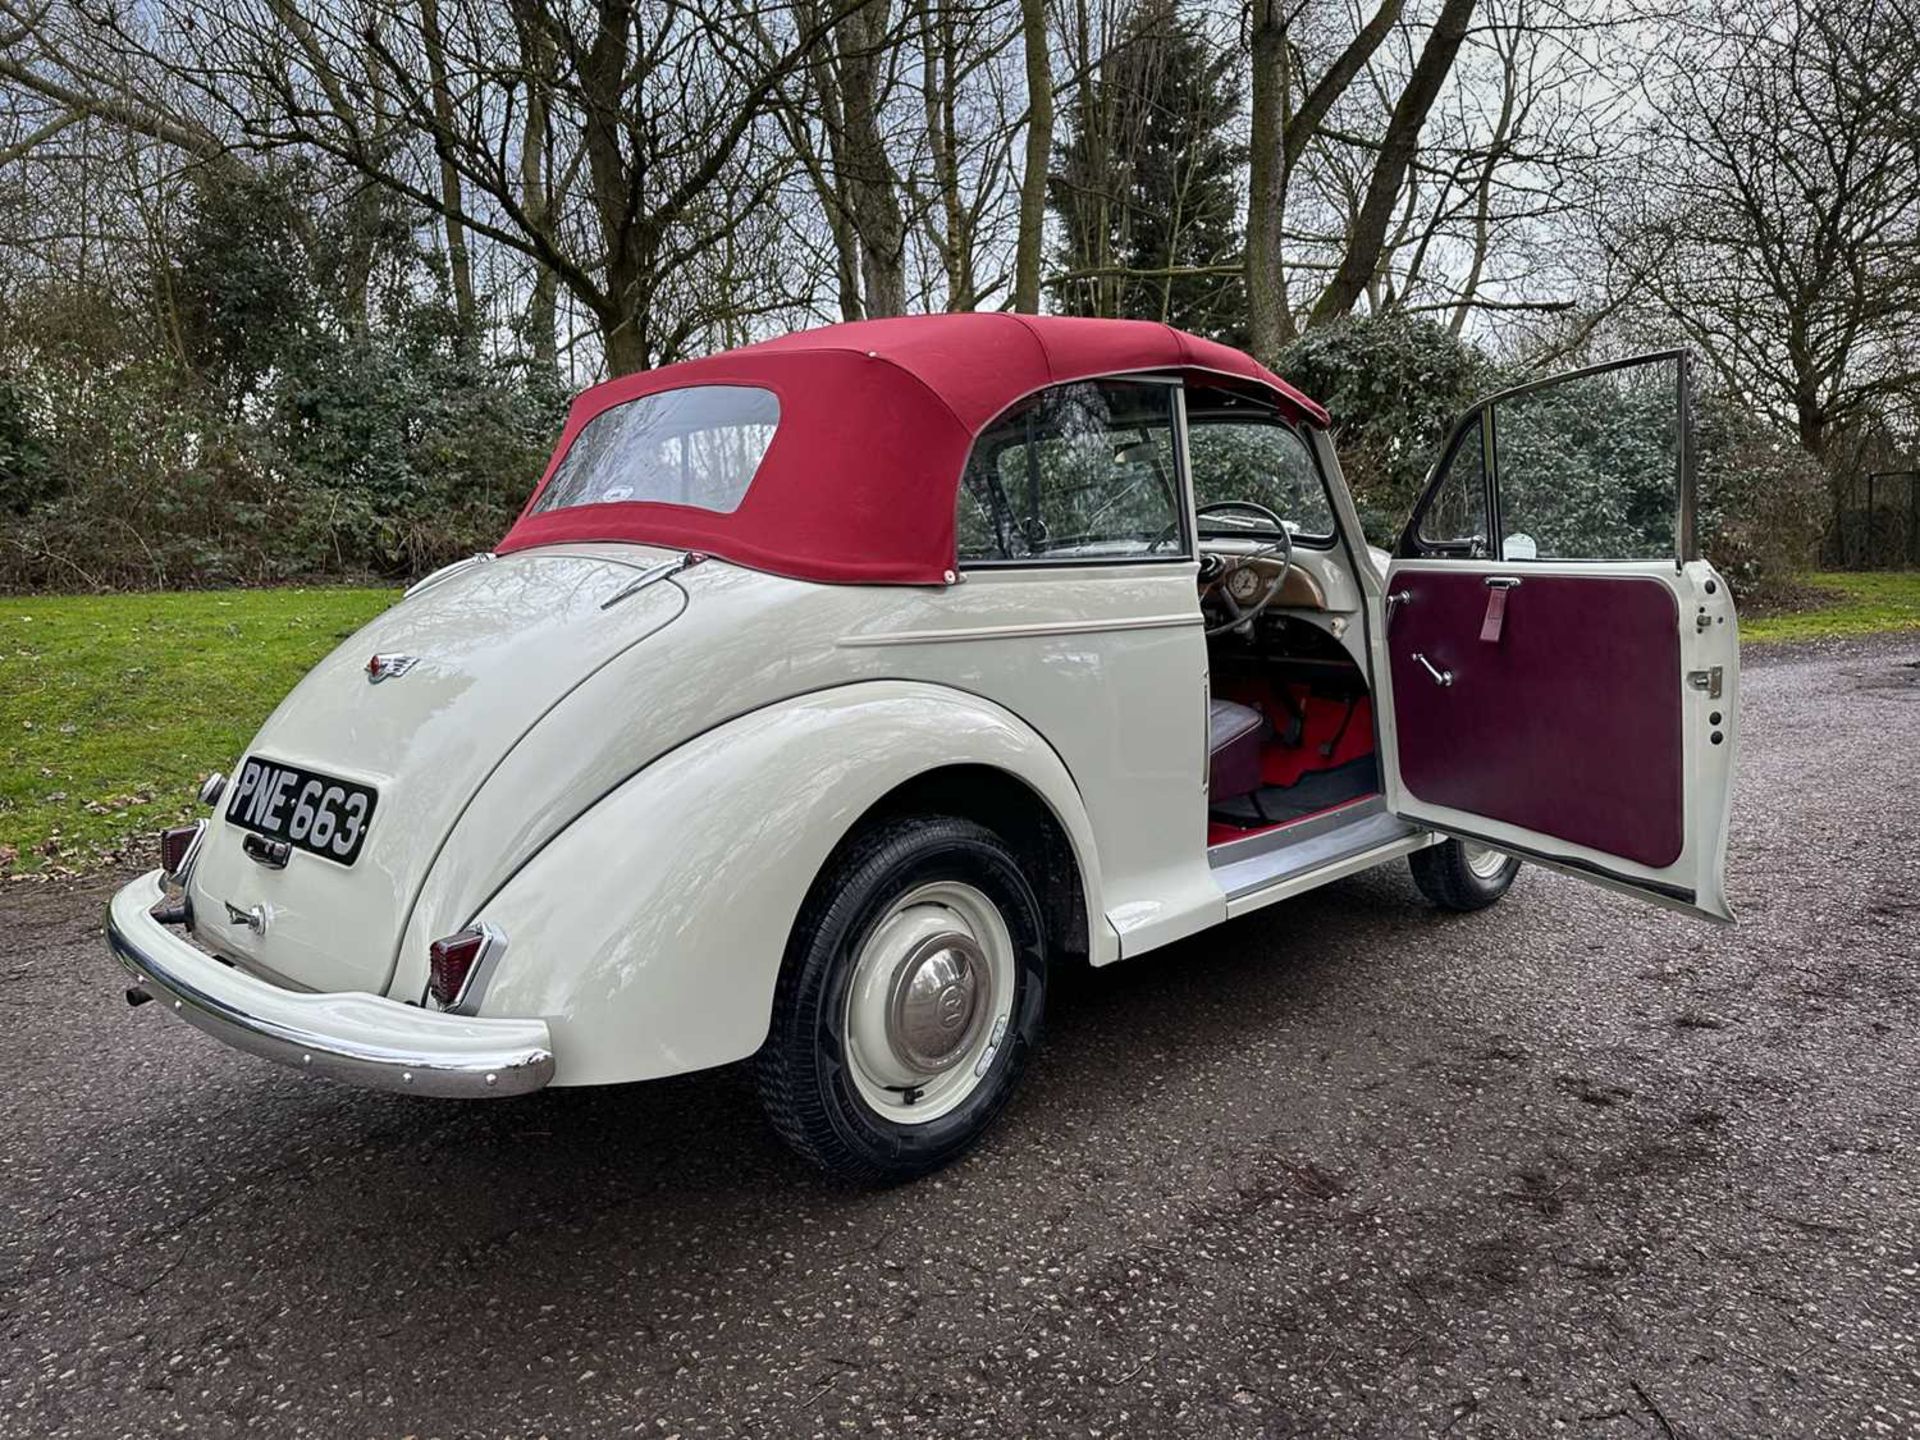 1954 Morris Minor Tourer Fully restored to concours standard - Image 39 of 100